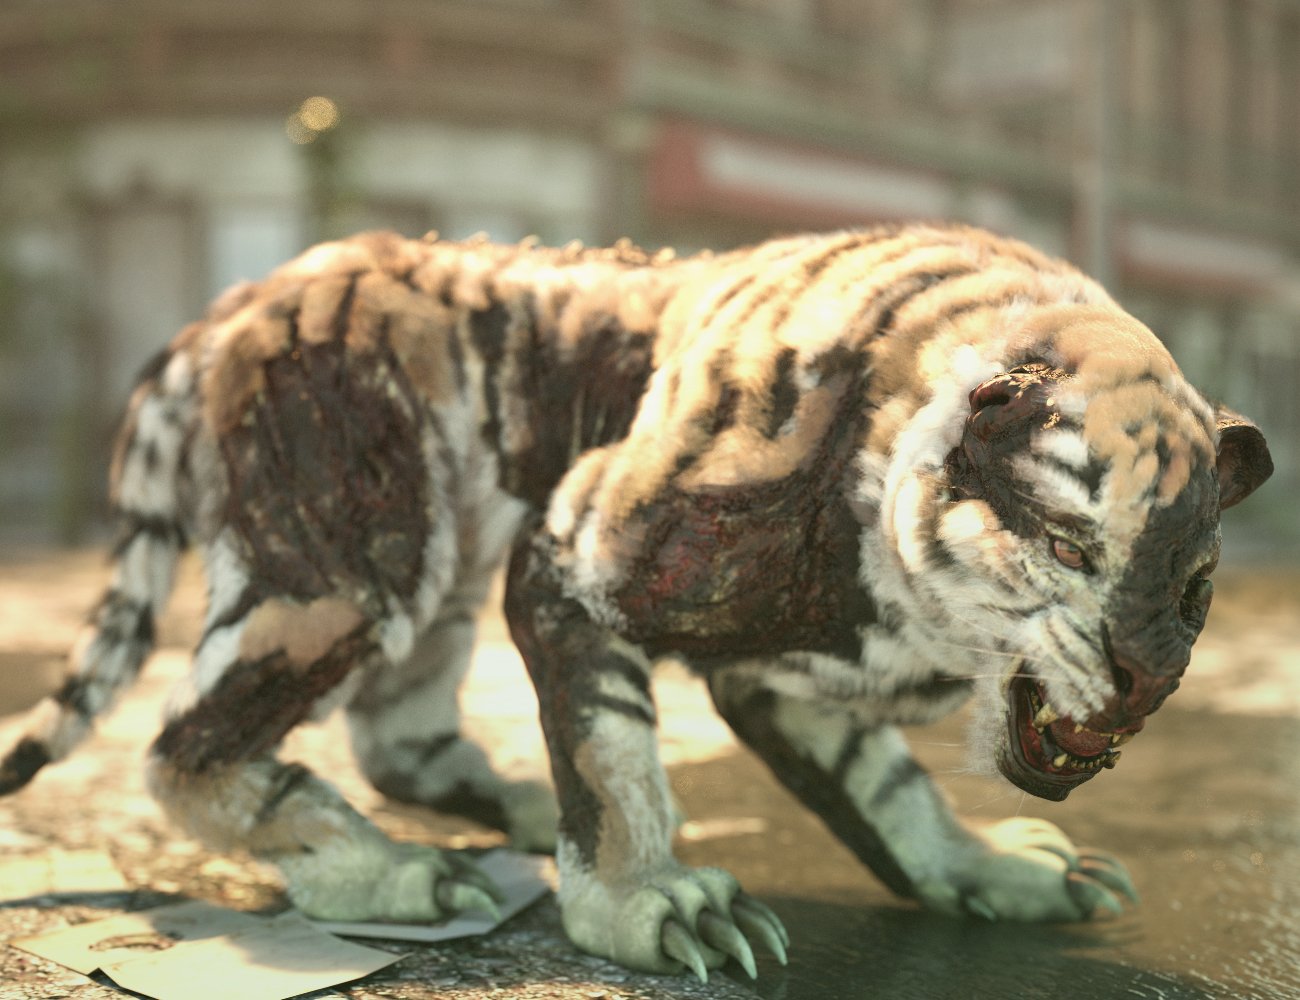 Zombie Tiger by: Charlie, 3D Models by Daz 3D